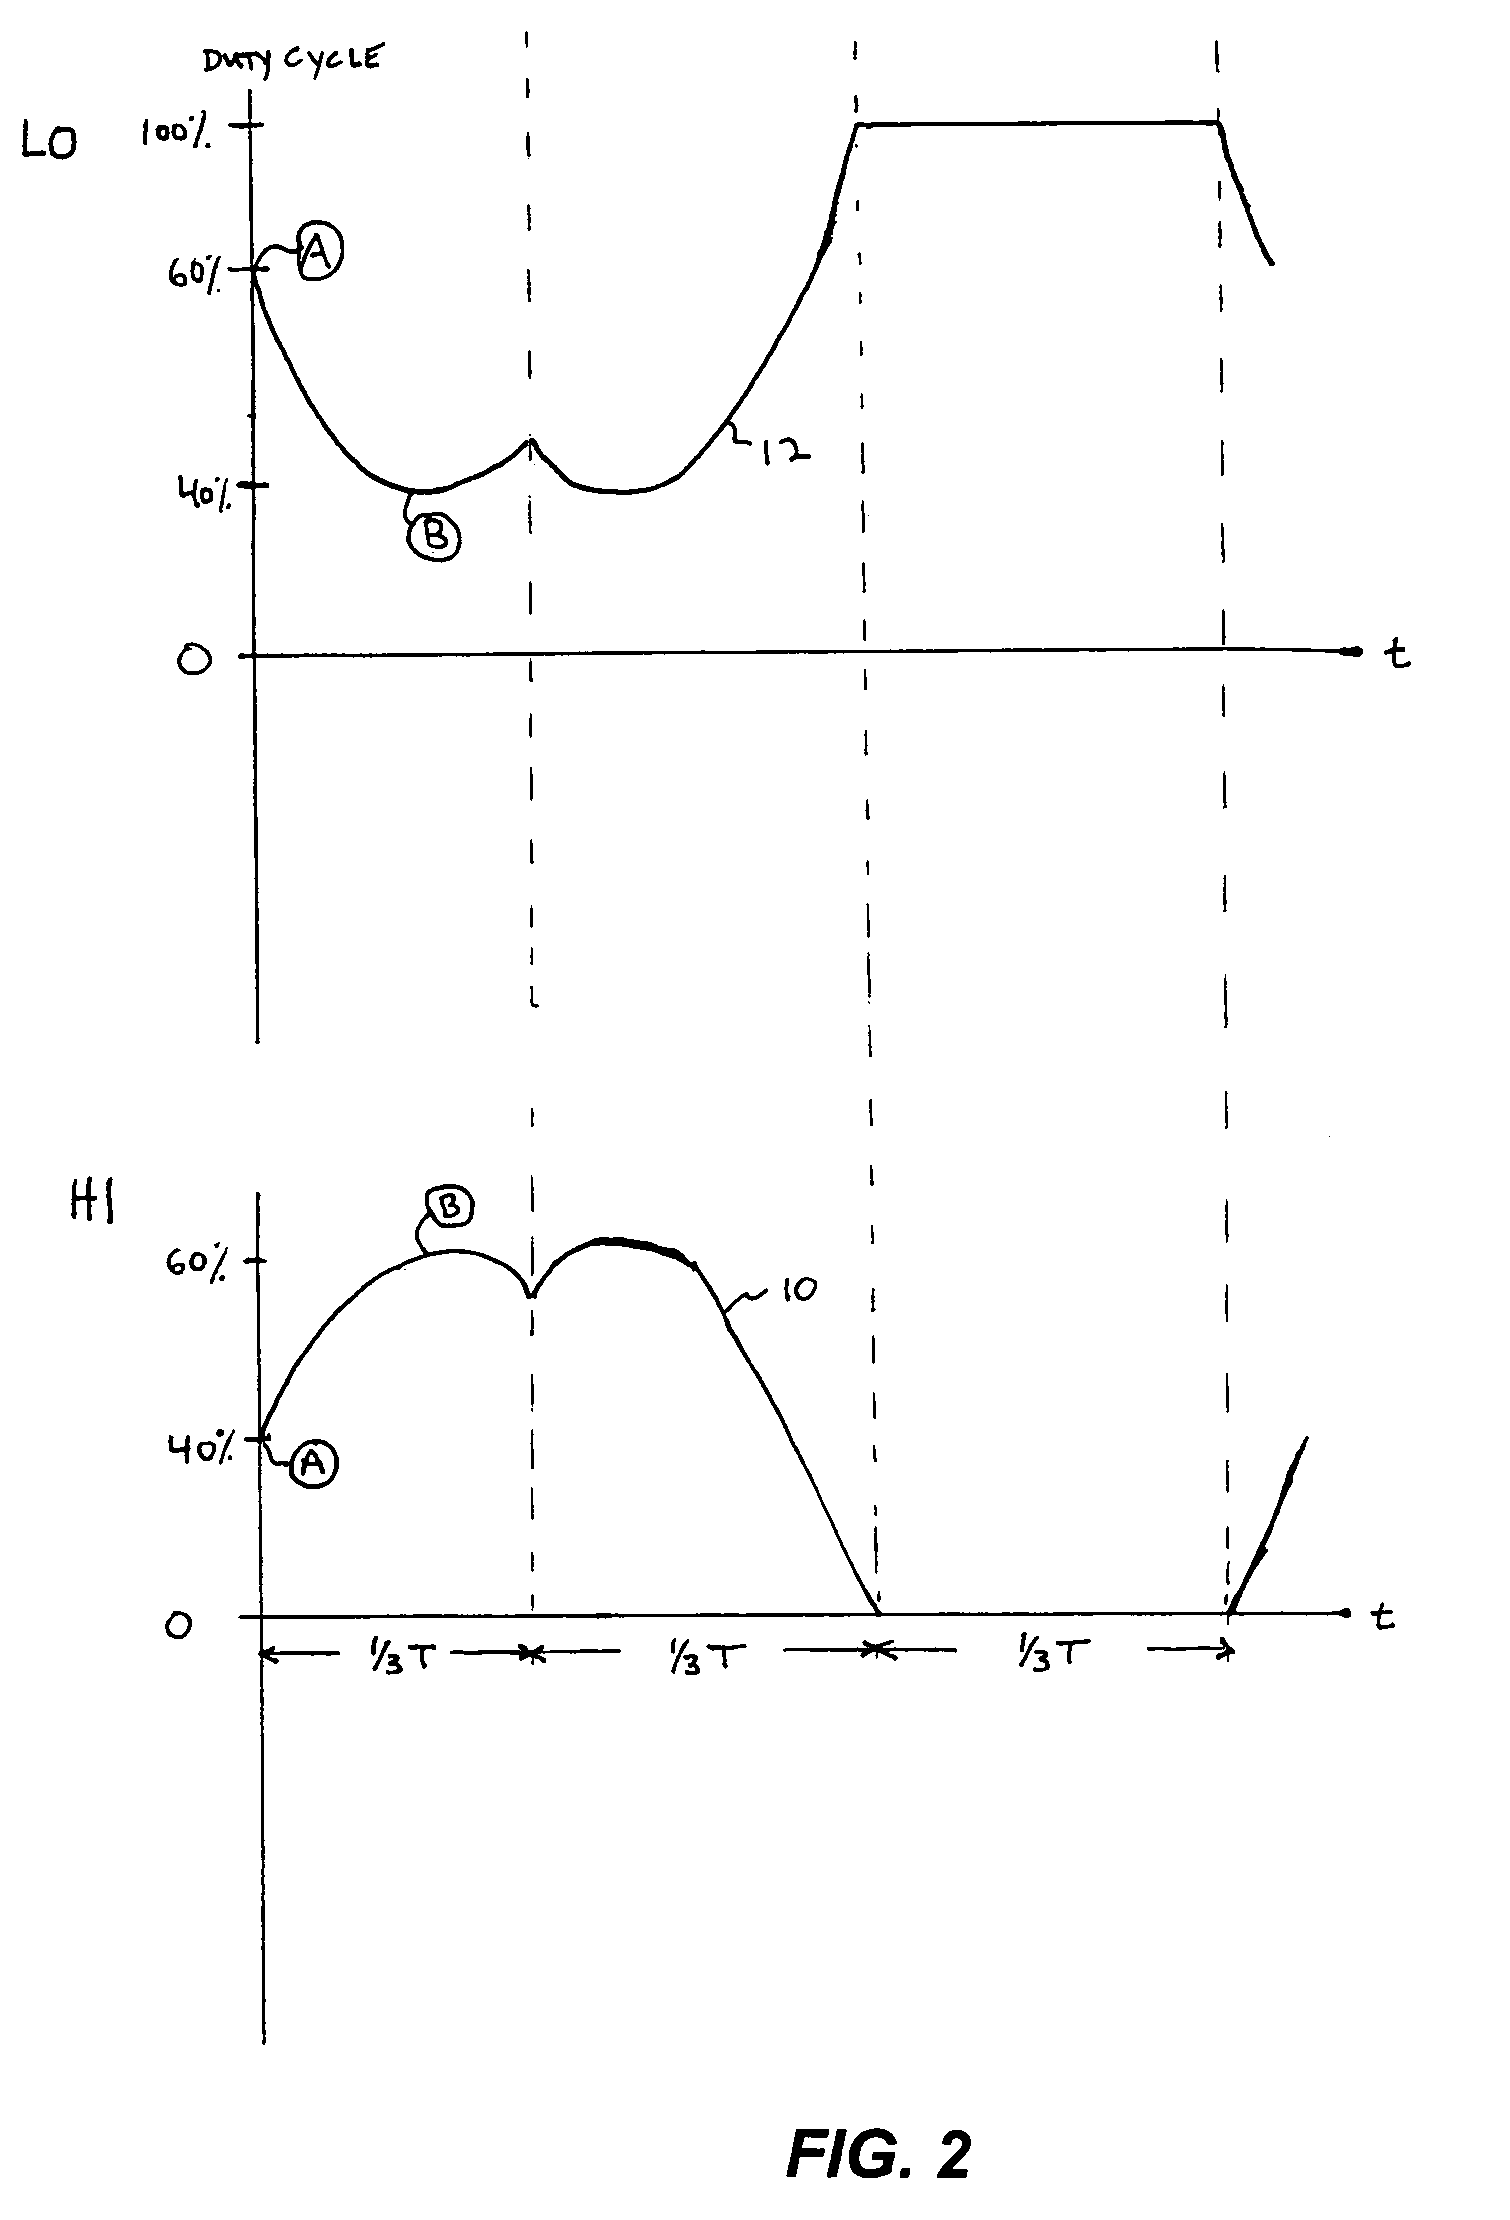 Methods and apparatus for commutating a brushless DC motor in a laser printer